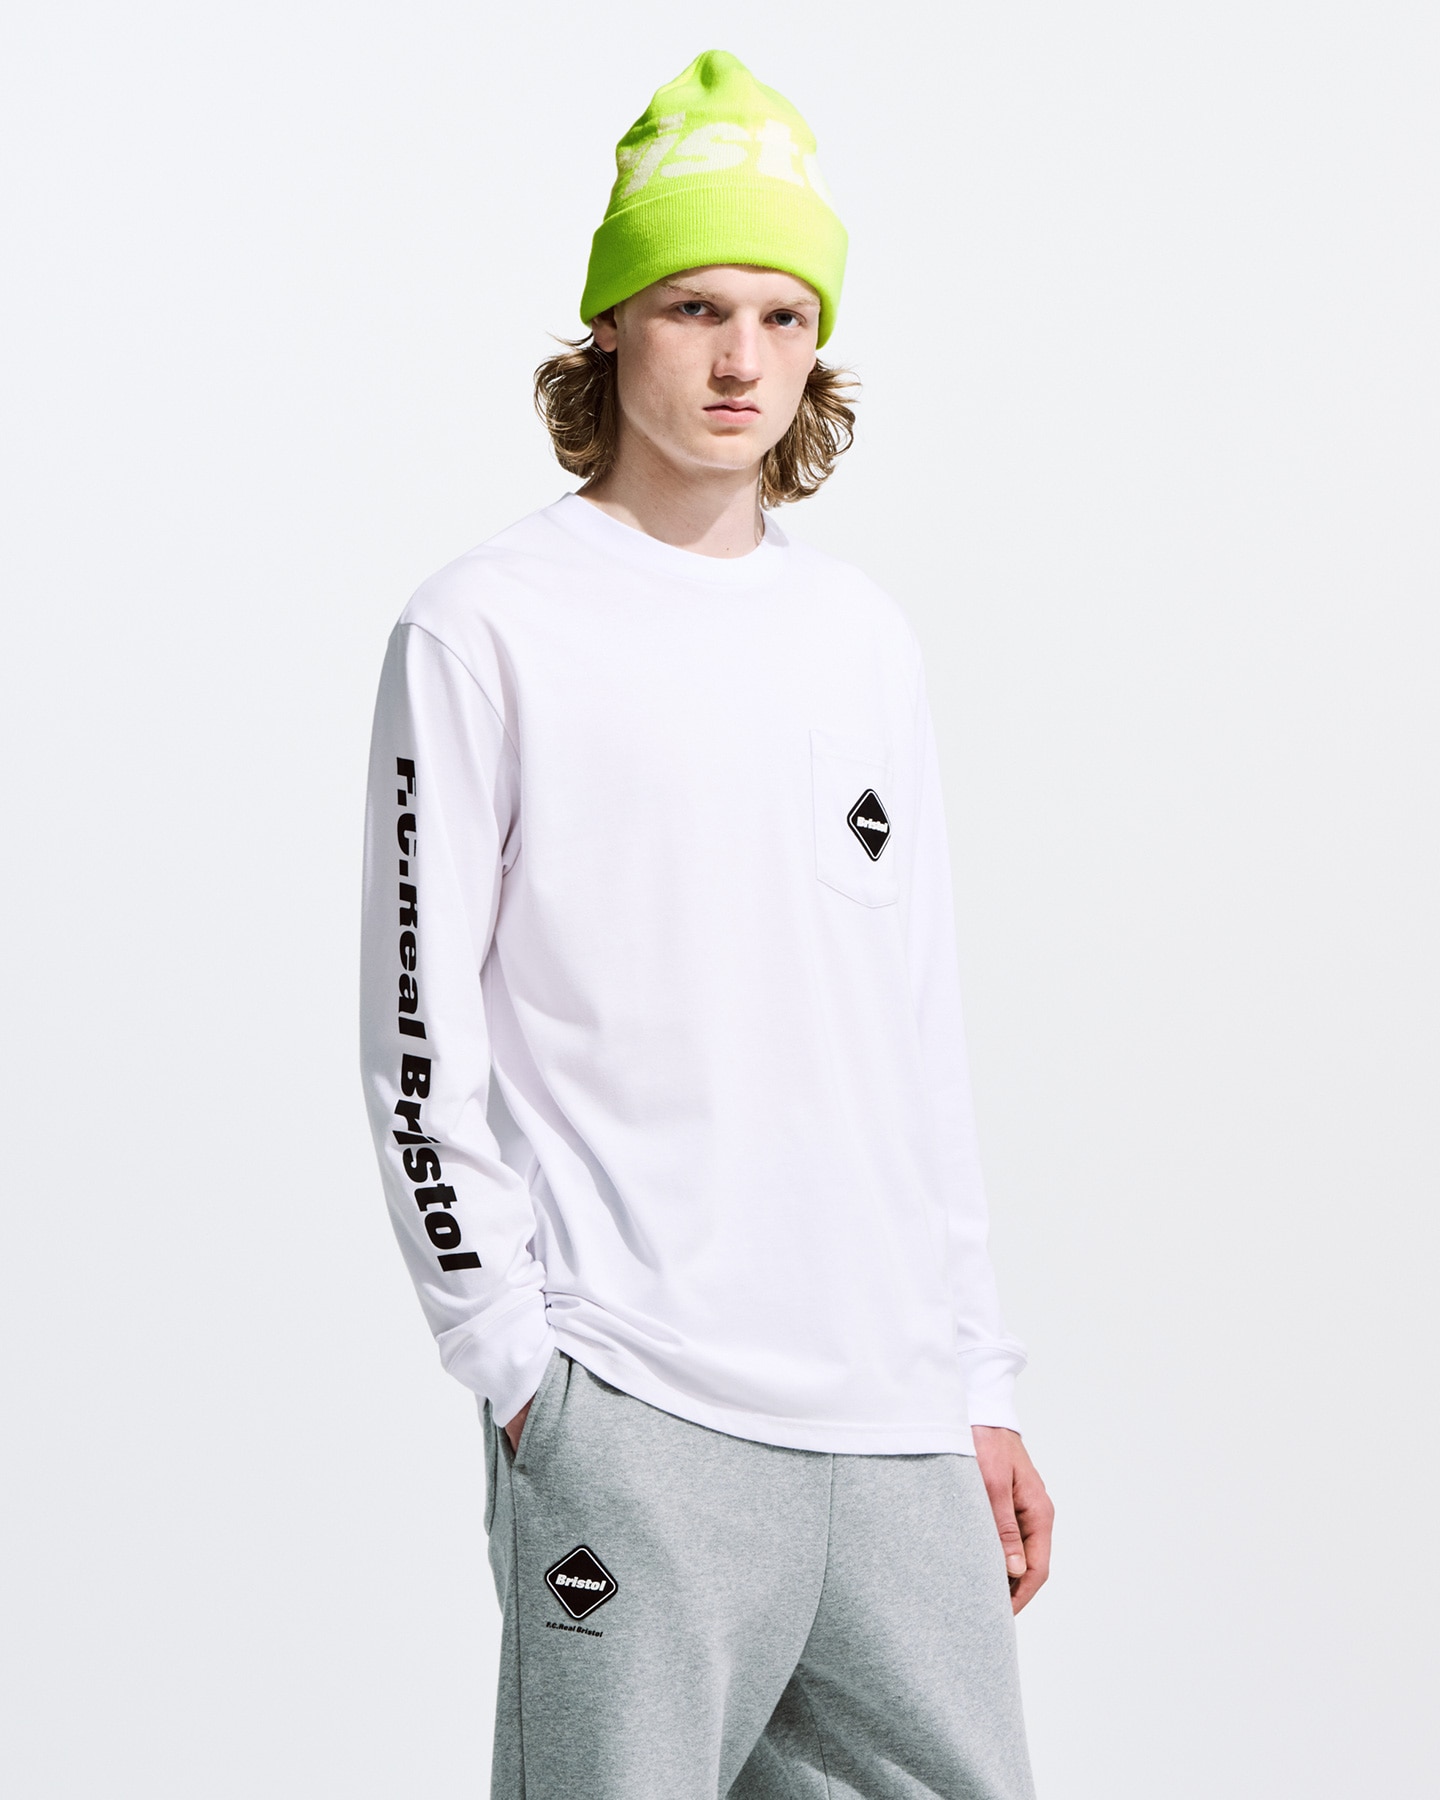 FCRB 23AW AUTHENTIC L/S TEAM POCKET TEE-